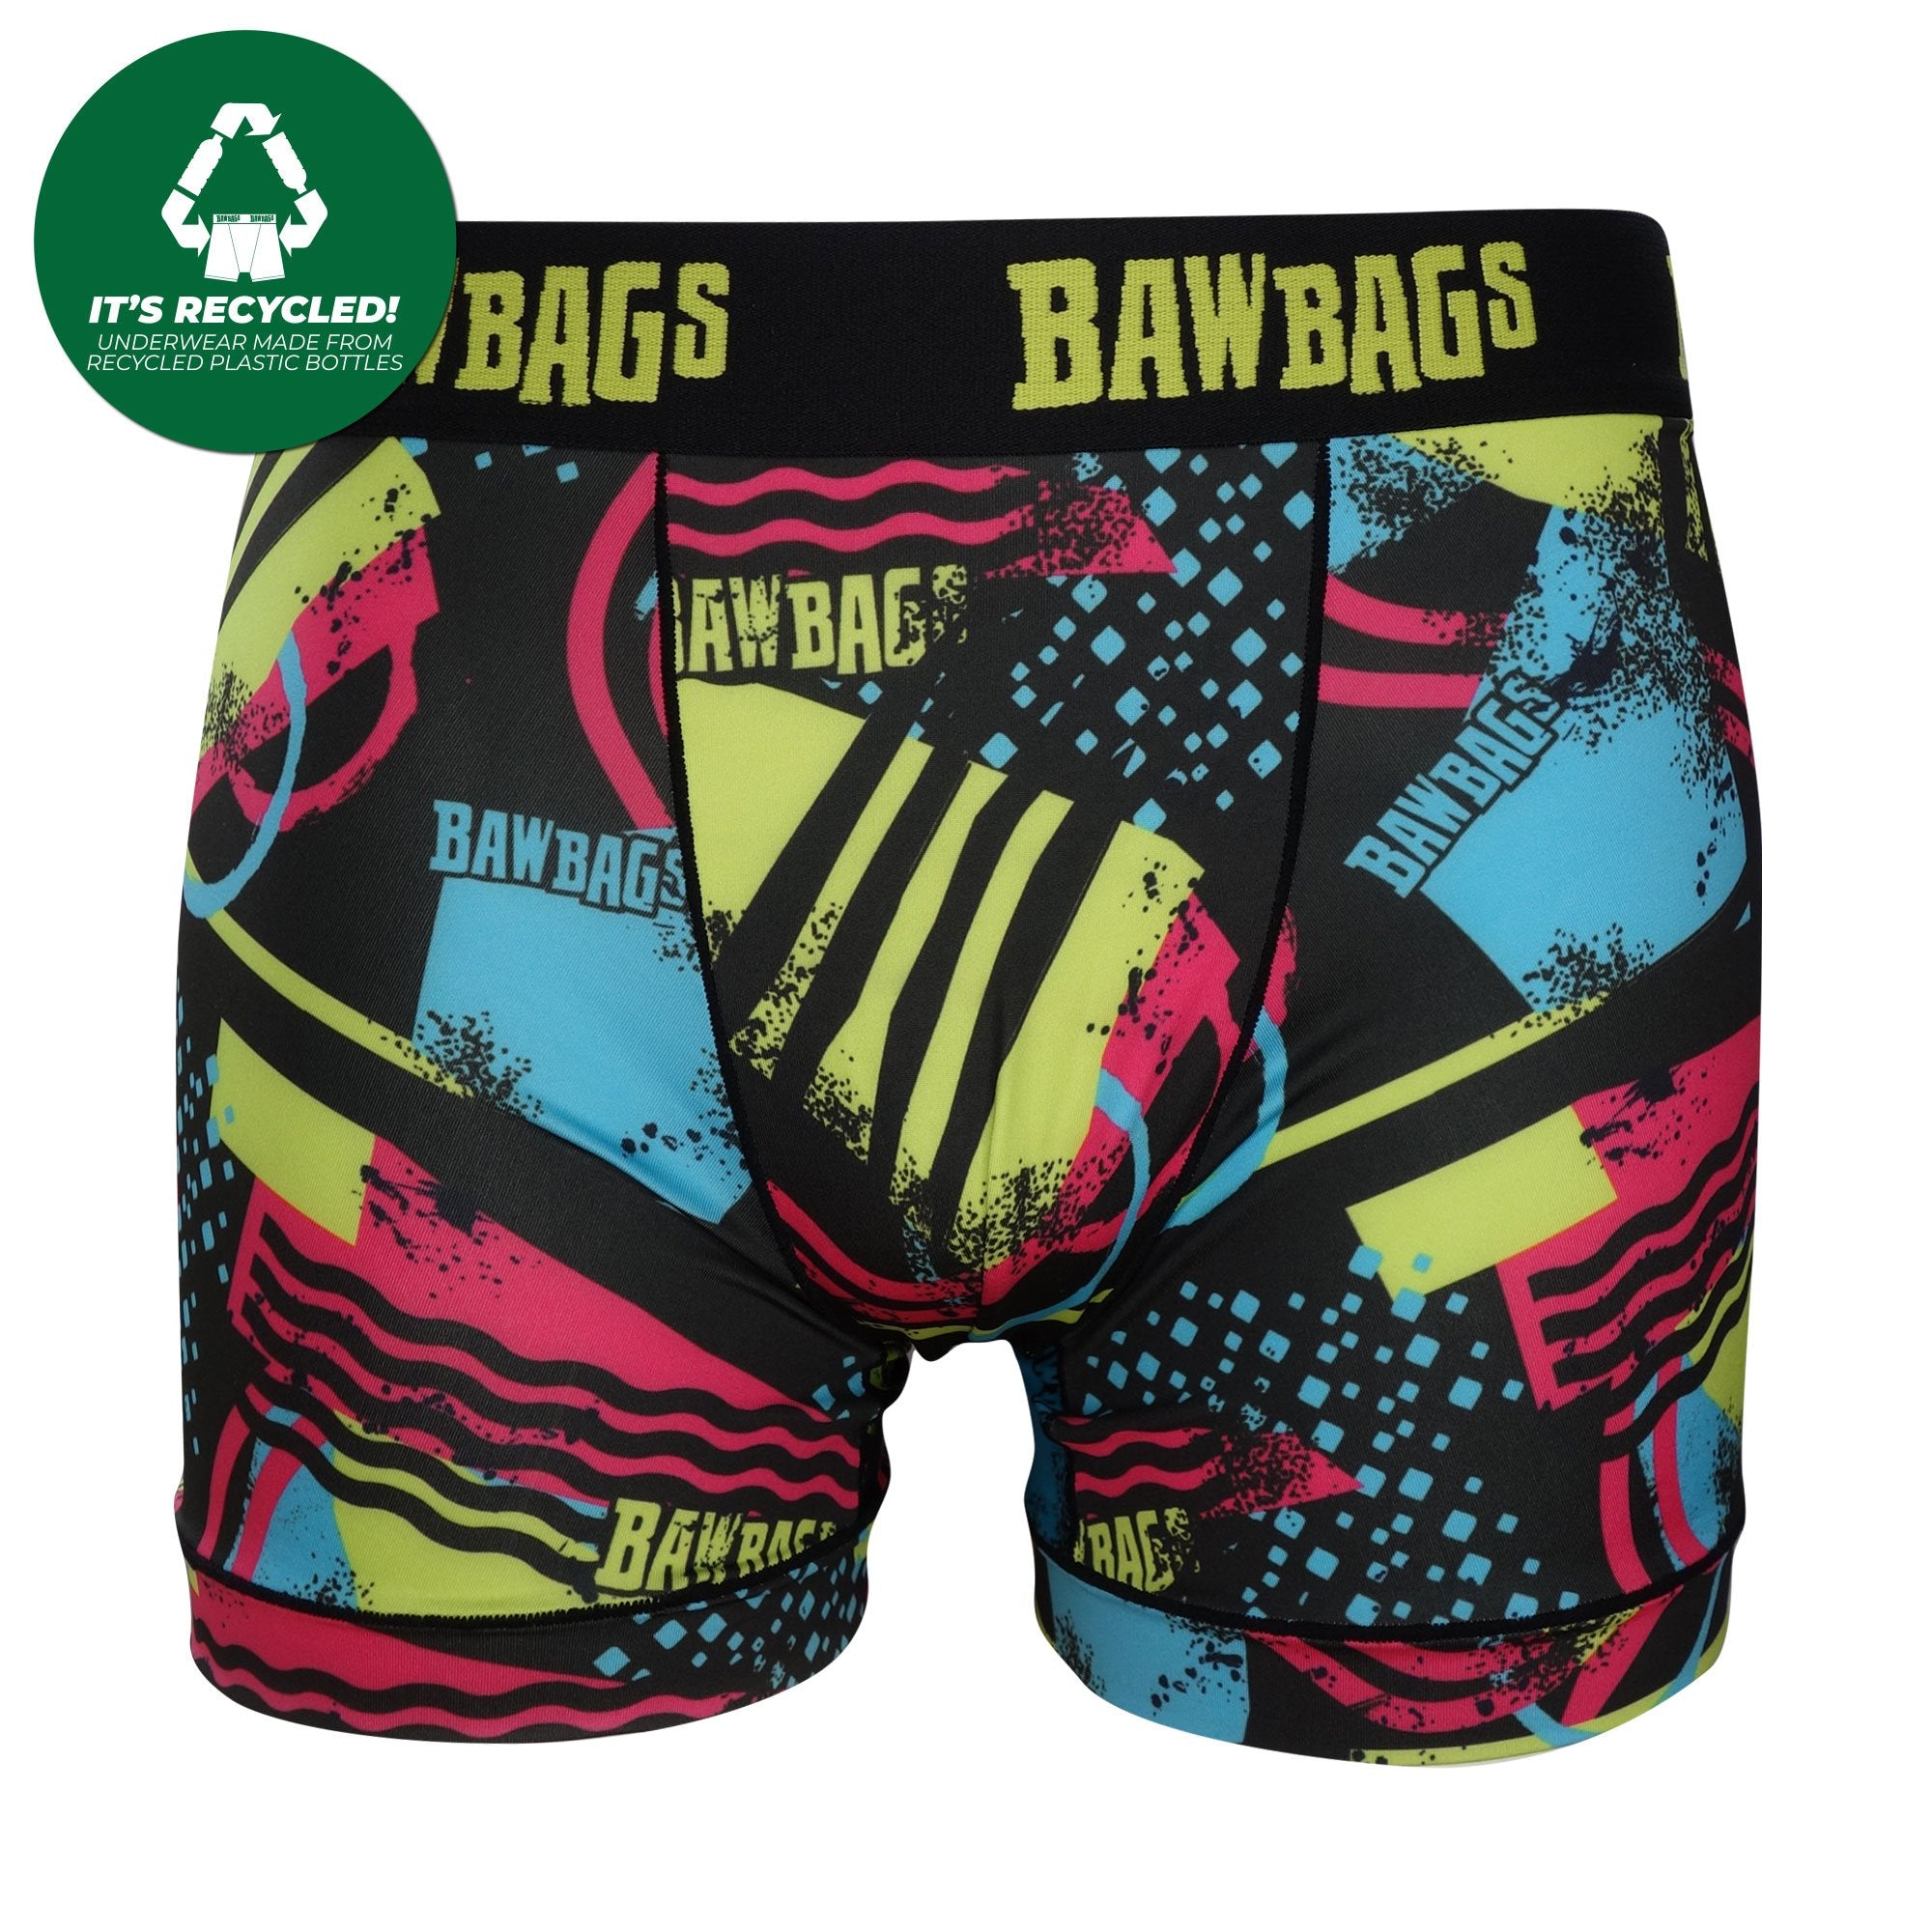 Abstract Cool De Sacs by Bawbags